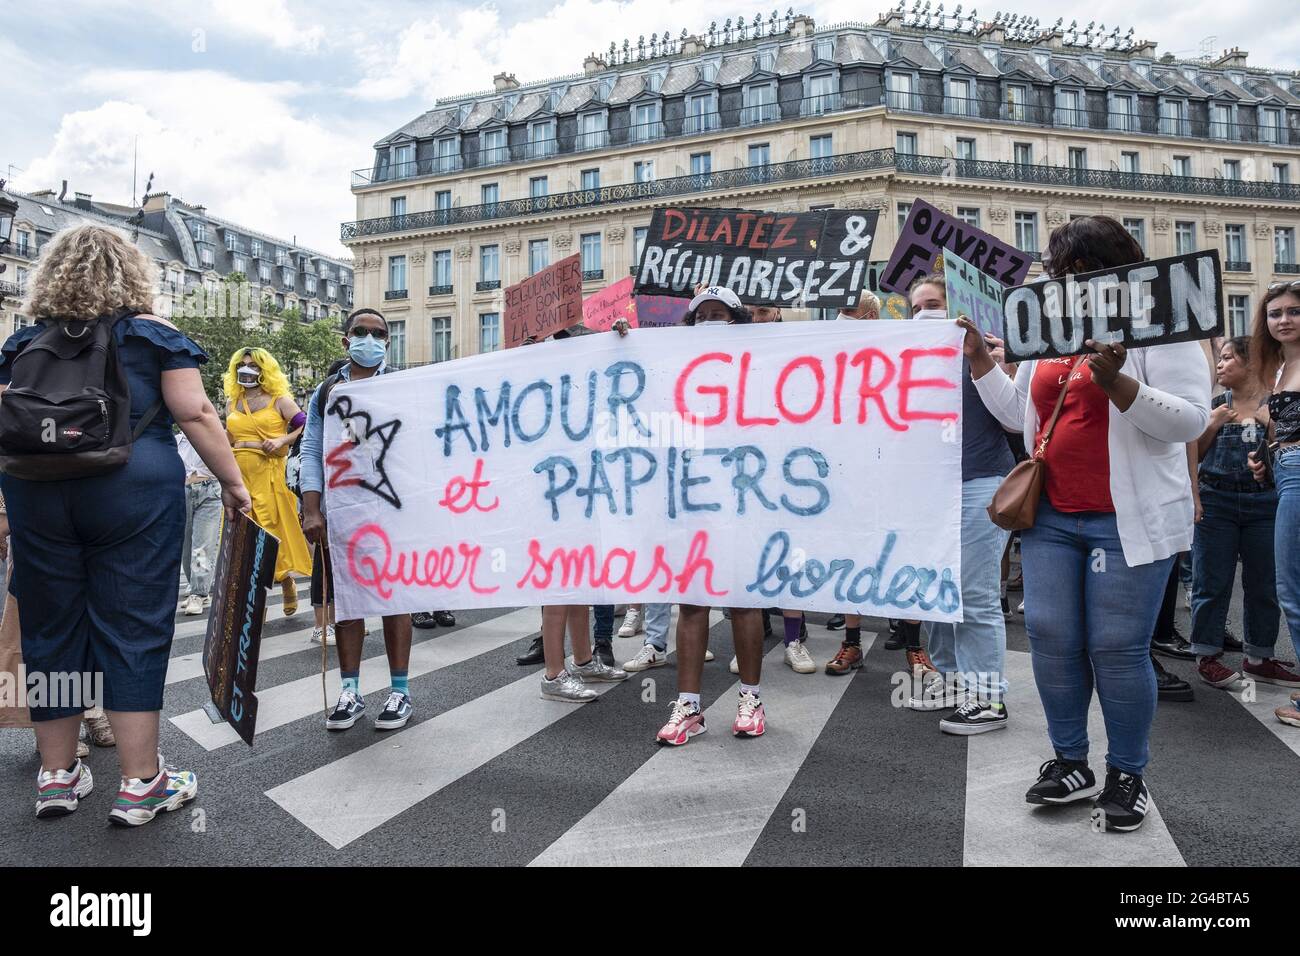 Paris, France. 20th June, 2021. A crowd of protesters at the march during the anti-racist and anti-capitalist pride march in Paris, France, on June 20, 2021. Photo by Pierrick Villette/Avenir Pictures/ABACAPRESS.COM Credit: Abaca Press/Alamy Live News Stock Photo